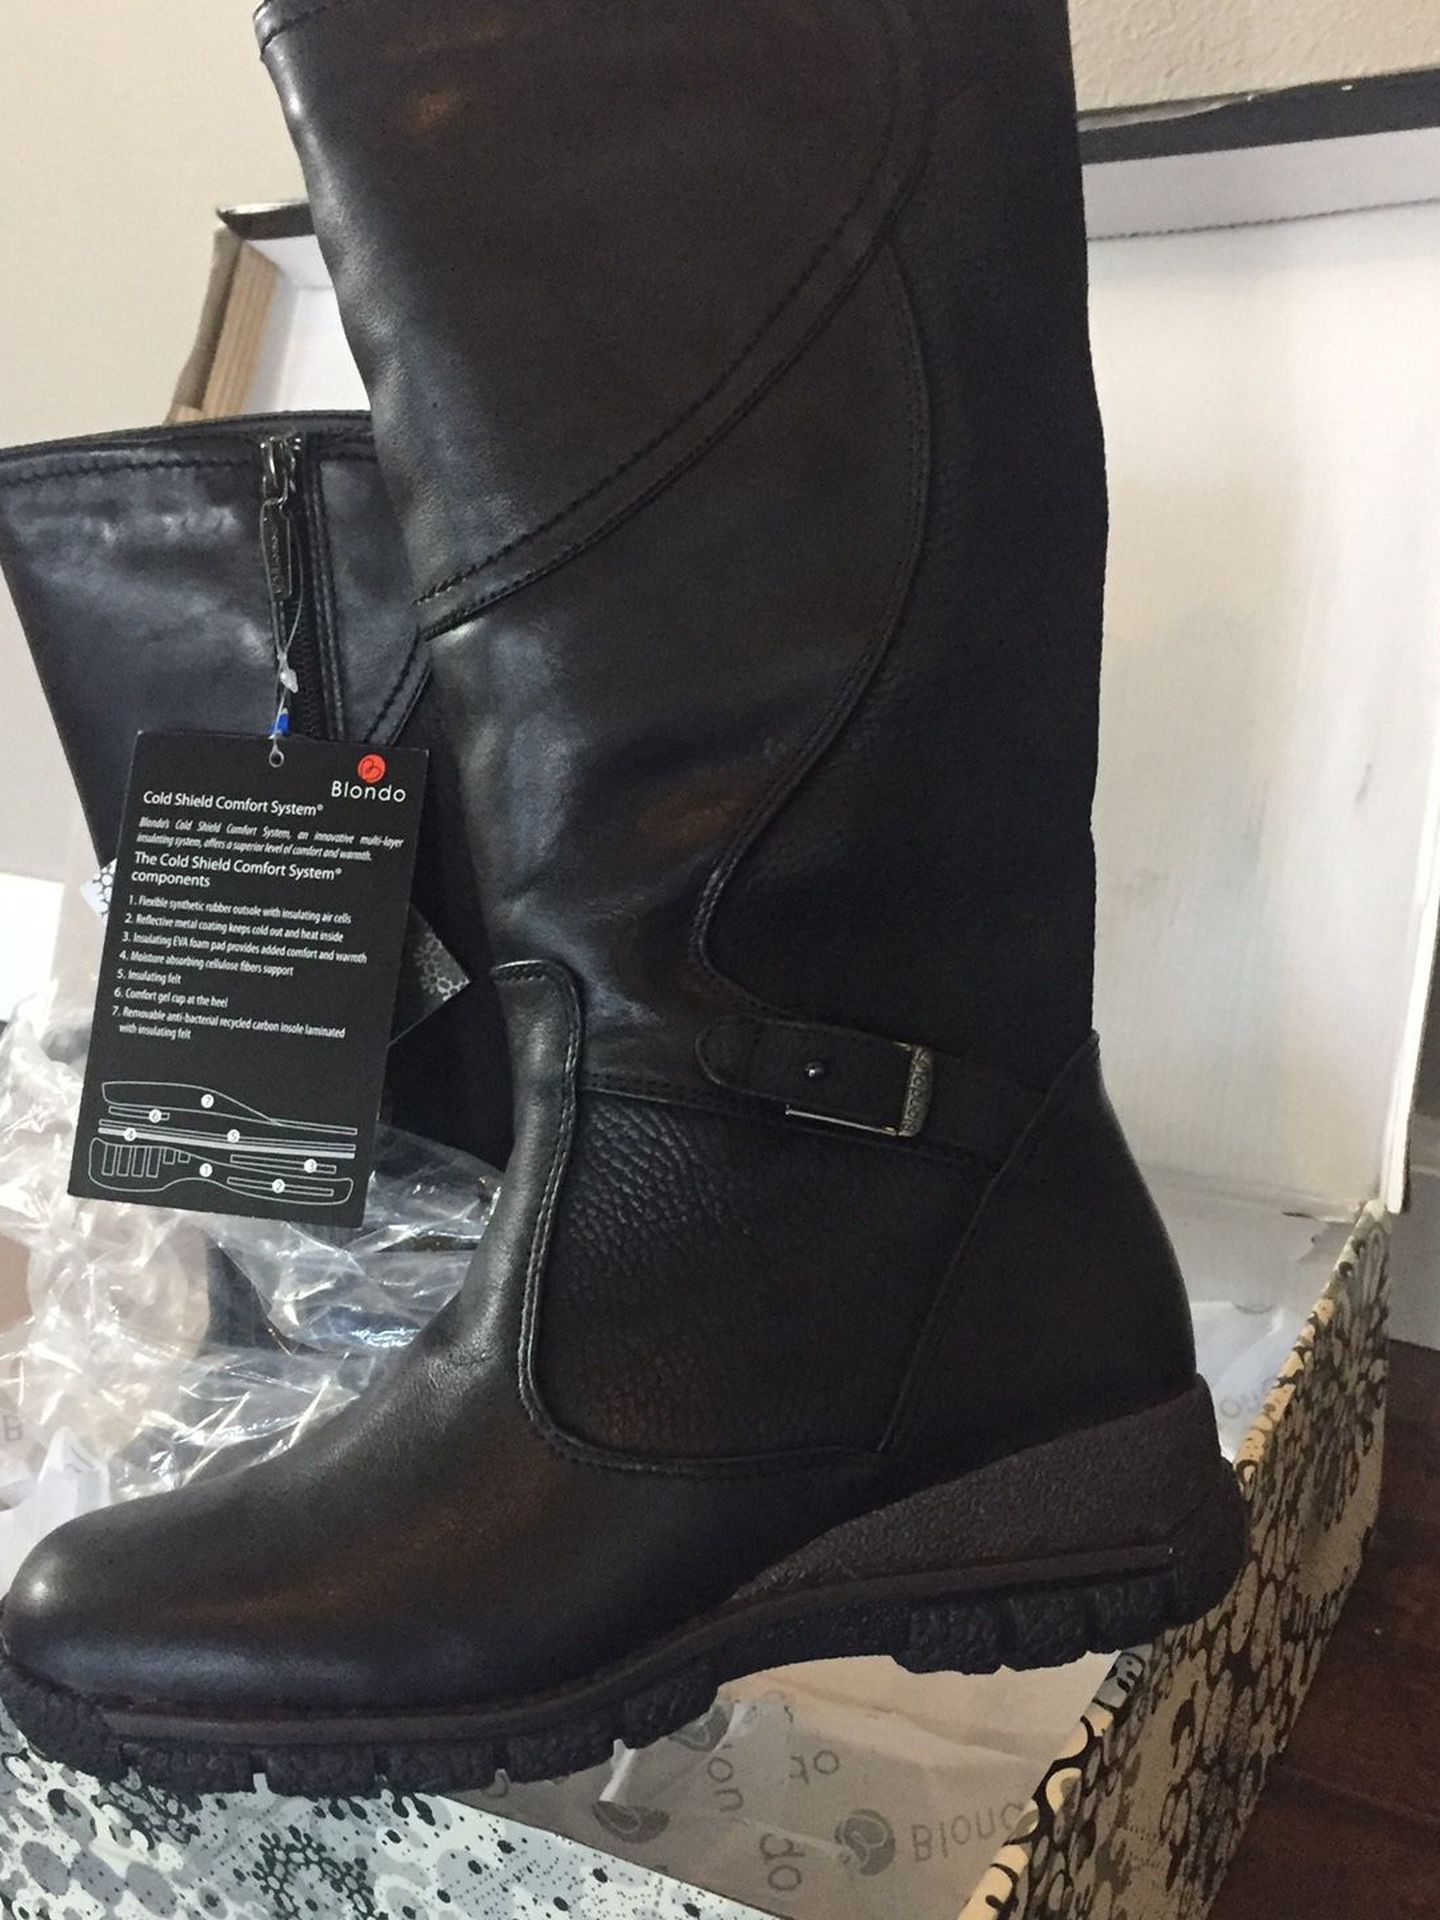 Womens New Boots $75.00 Lined